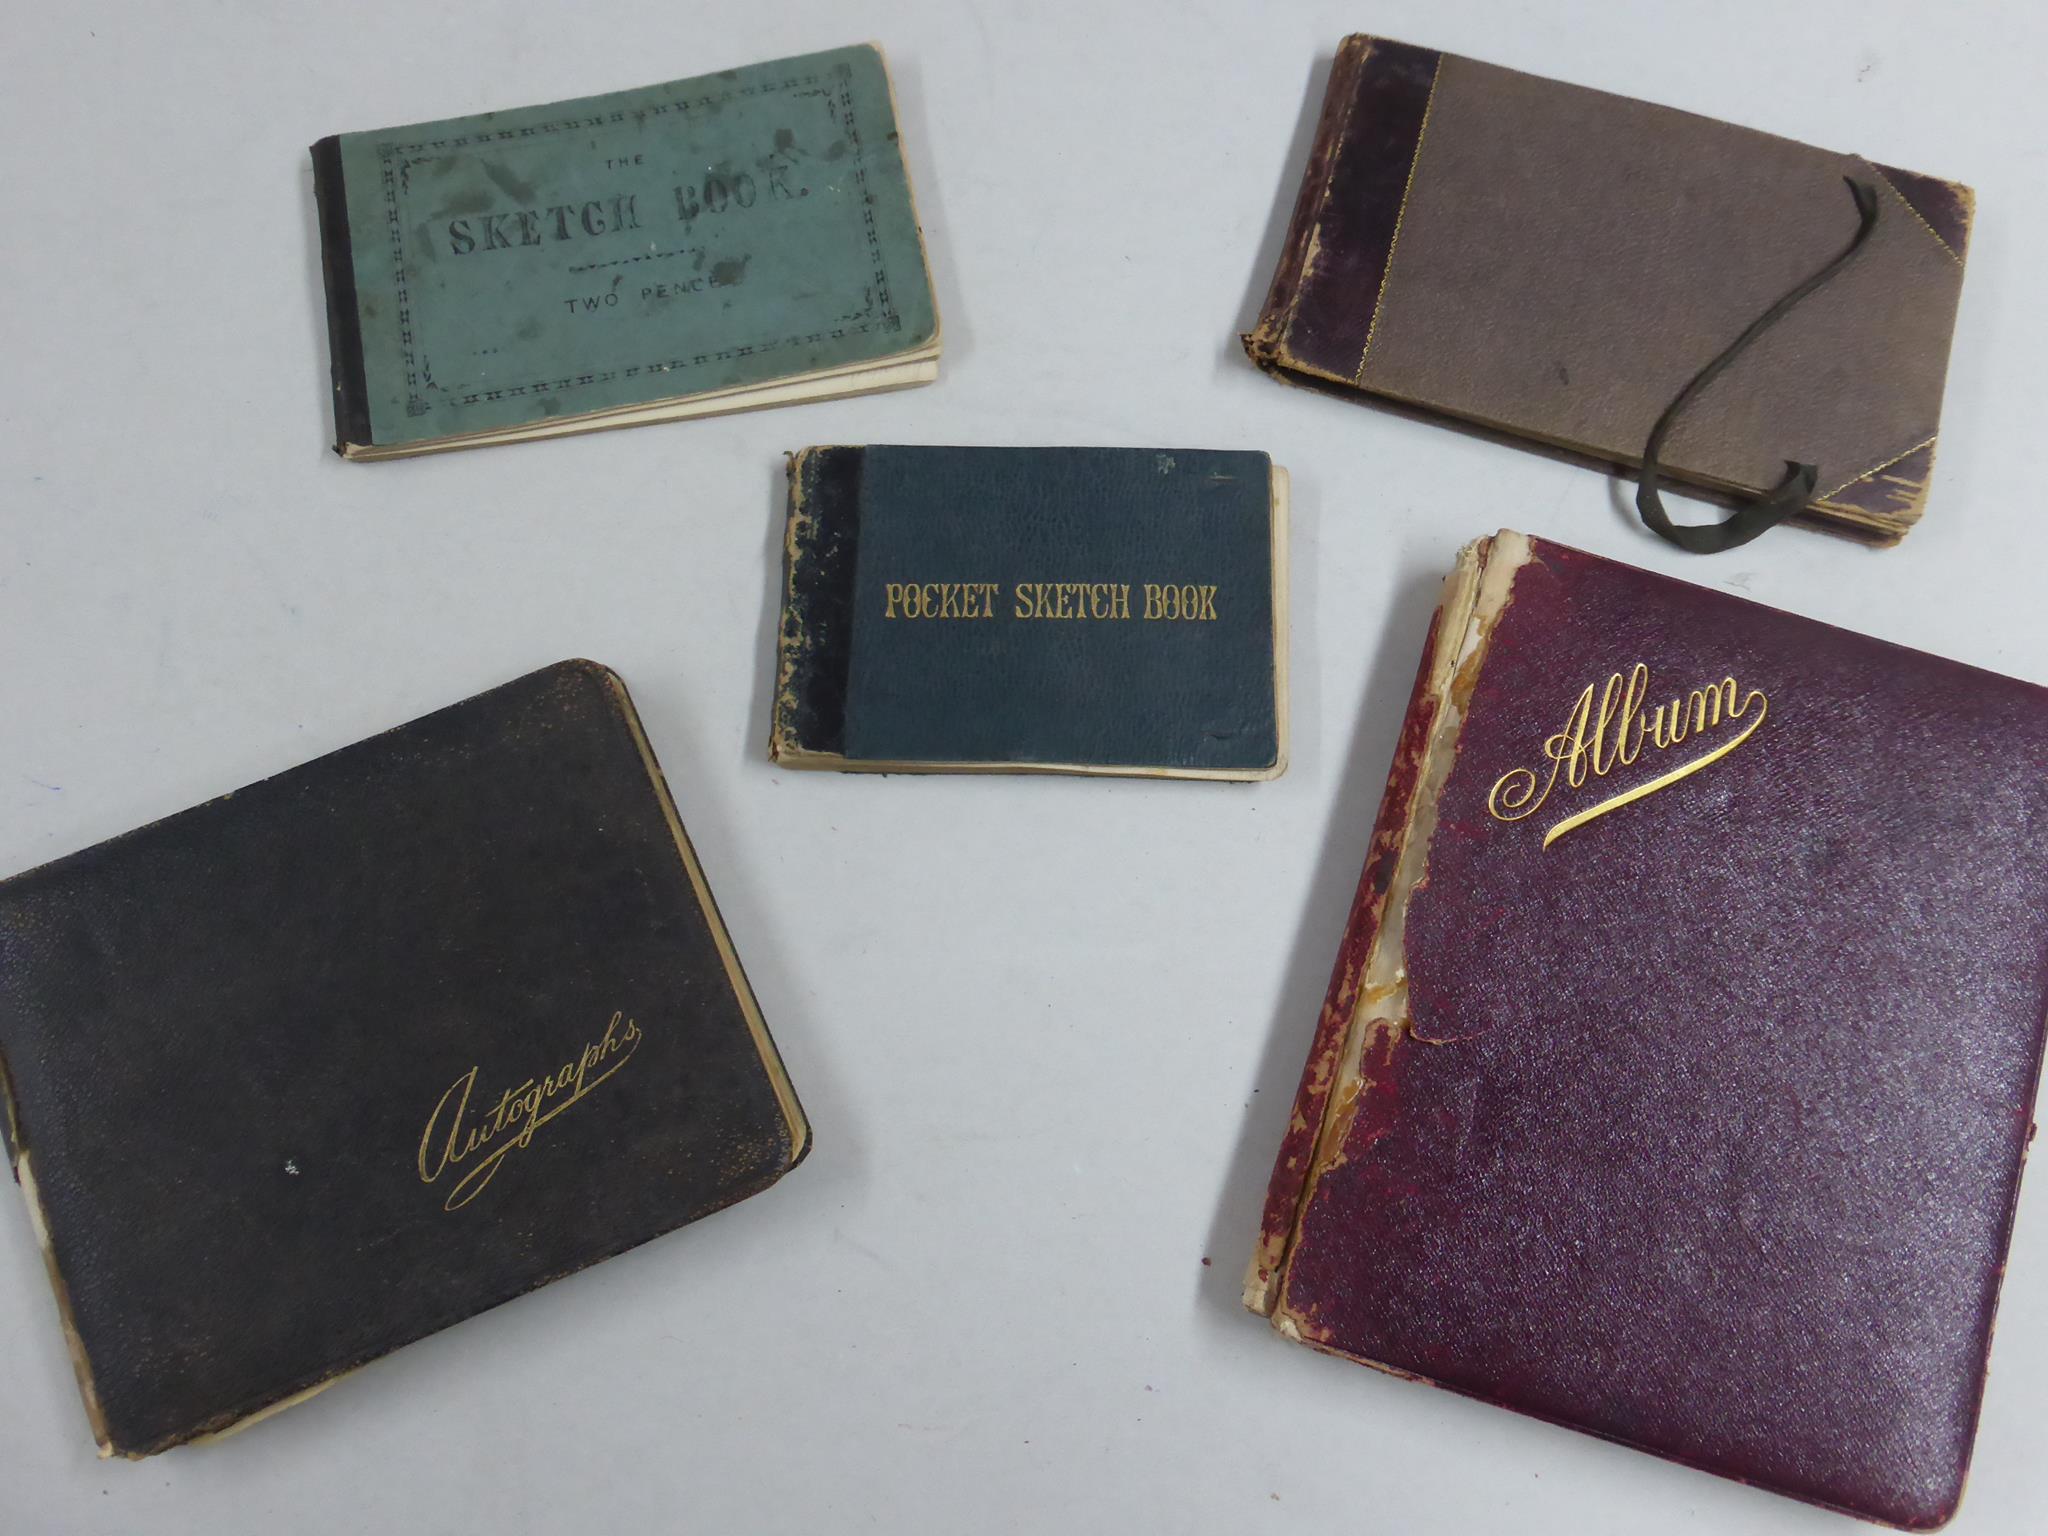 MISC. SKETCH BOOKS AND AUTOGRAPH BOOKS DATING FROM WWI ERA